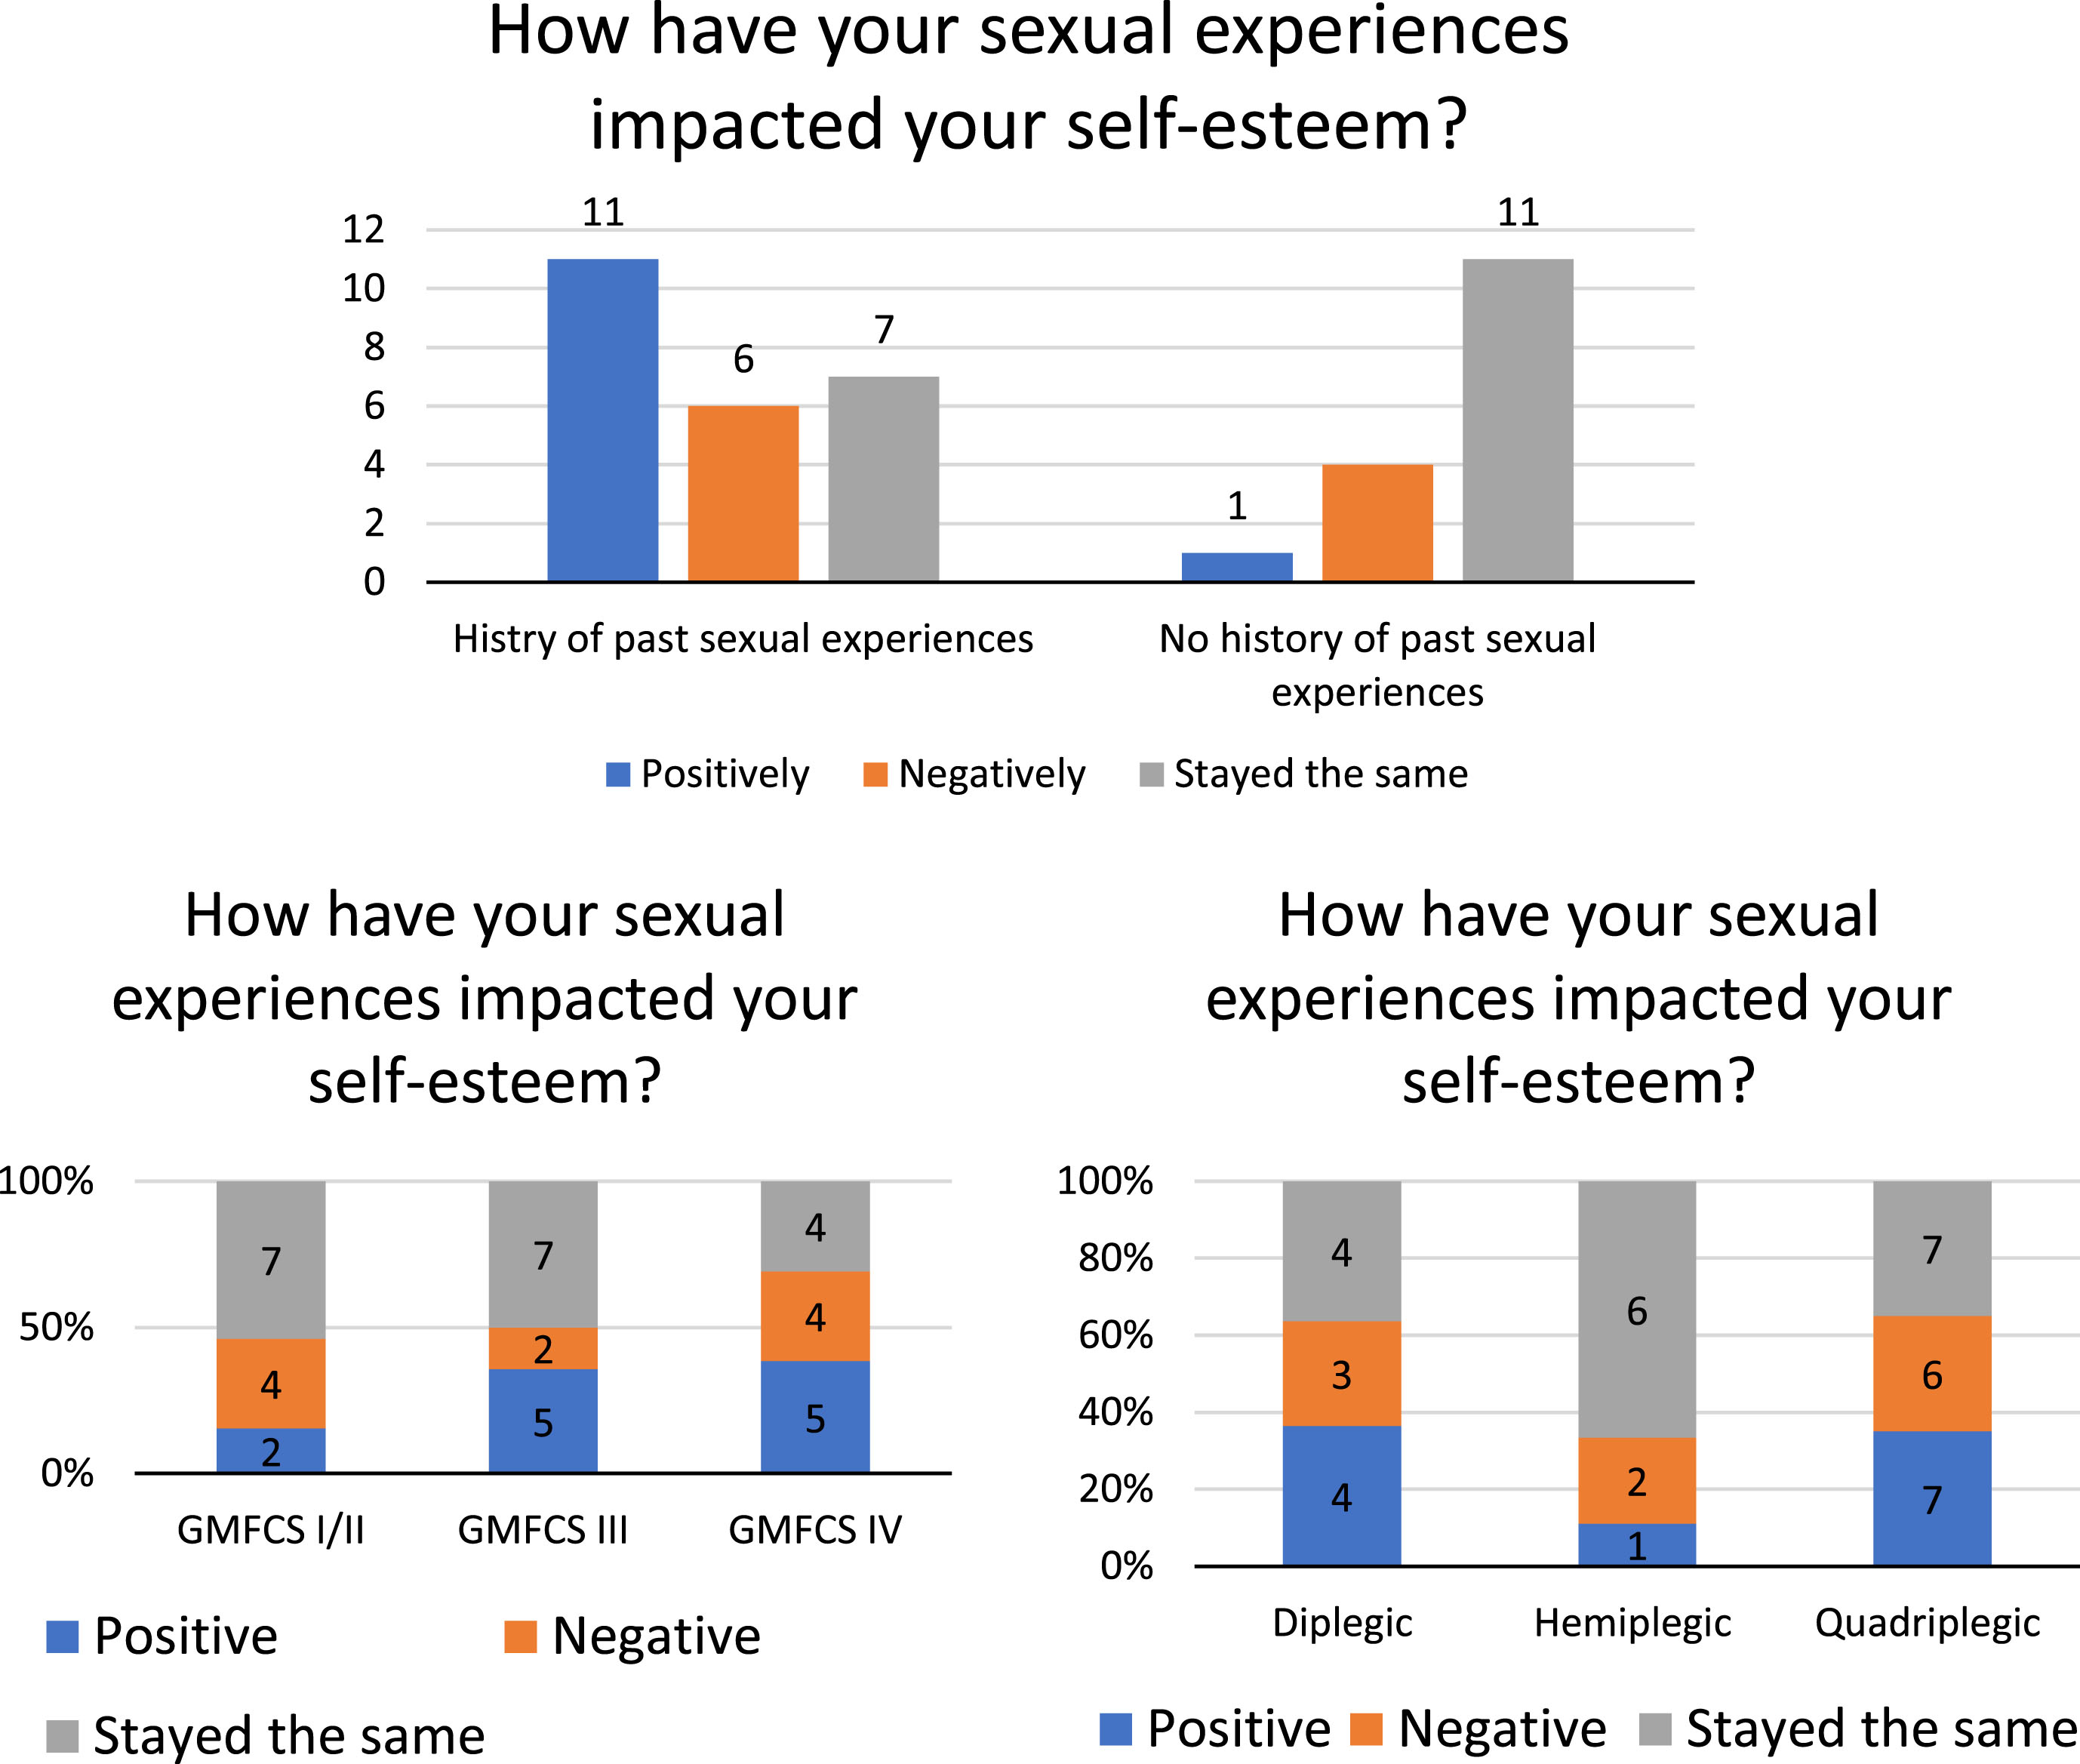 Impact of sexual experiences on self-esteem by (a) history of past sexual experience, (b) Gross Motor Function Classification System (GMFCS) level, and (c) topographical distribution.